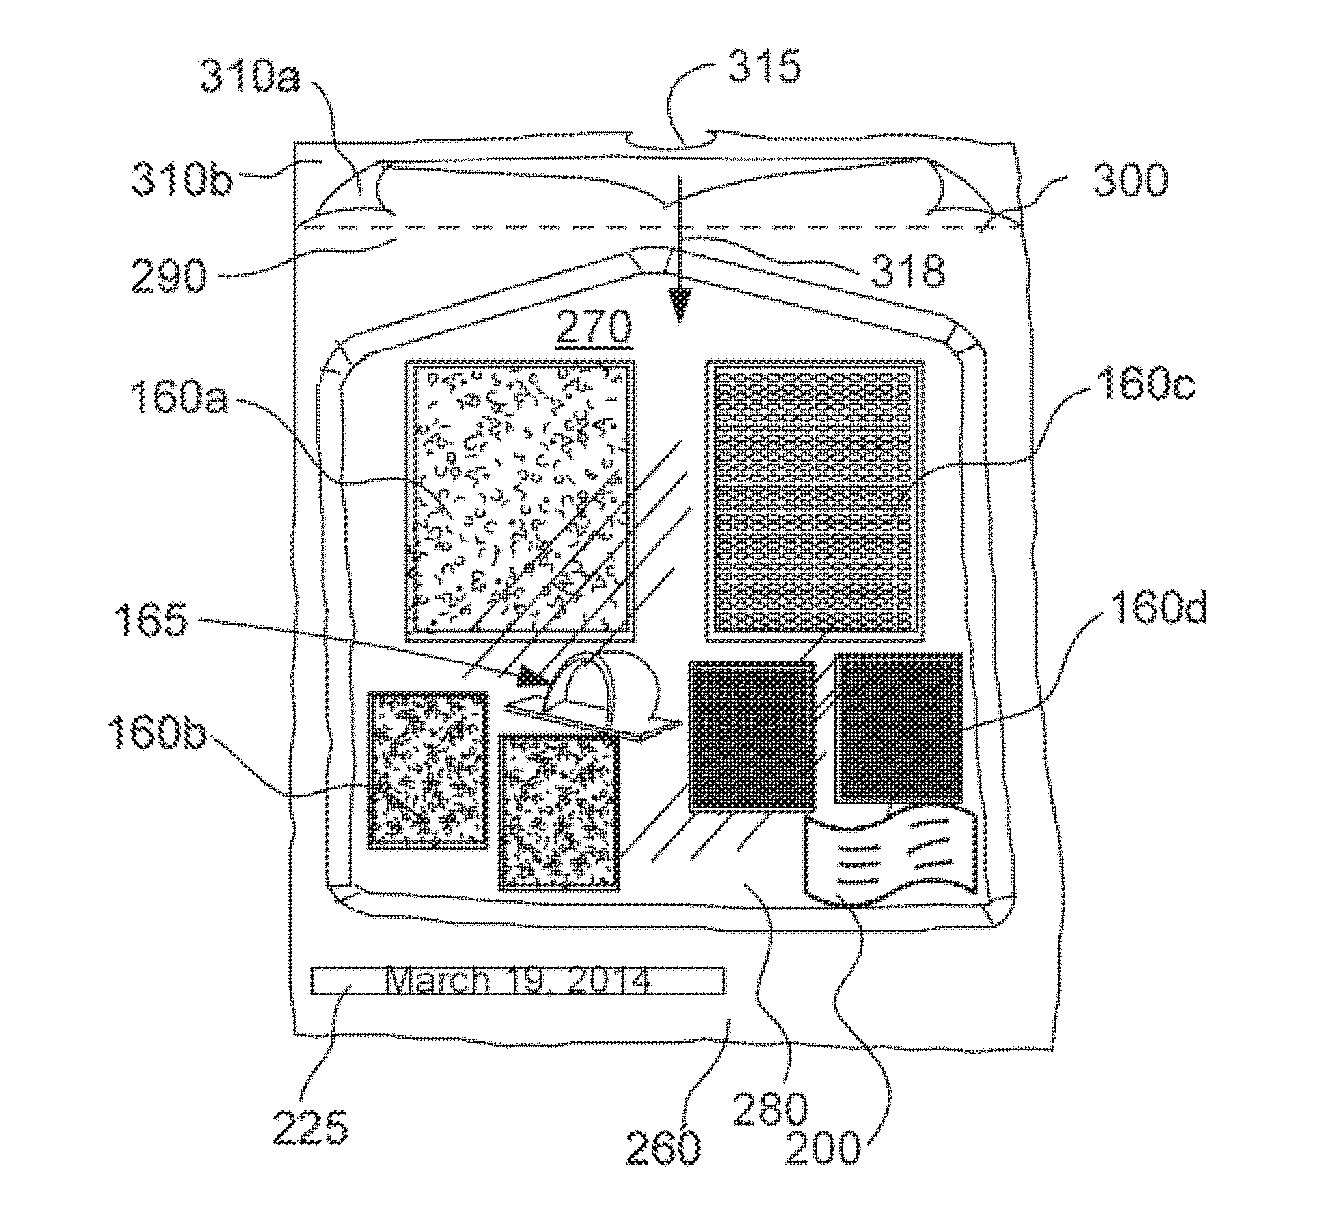 Surgical appliance kit and system for releasably securing a surgical appliance to a surgical field and method of assembling the surgical applicance kit